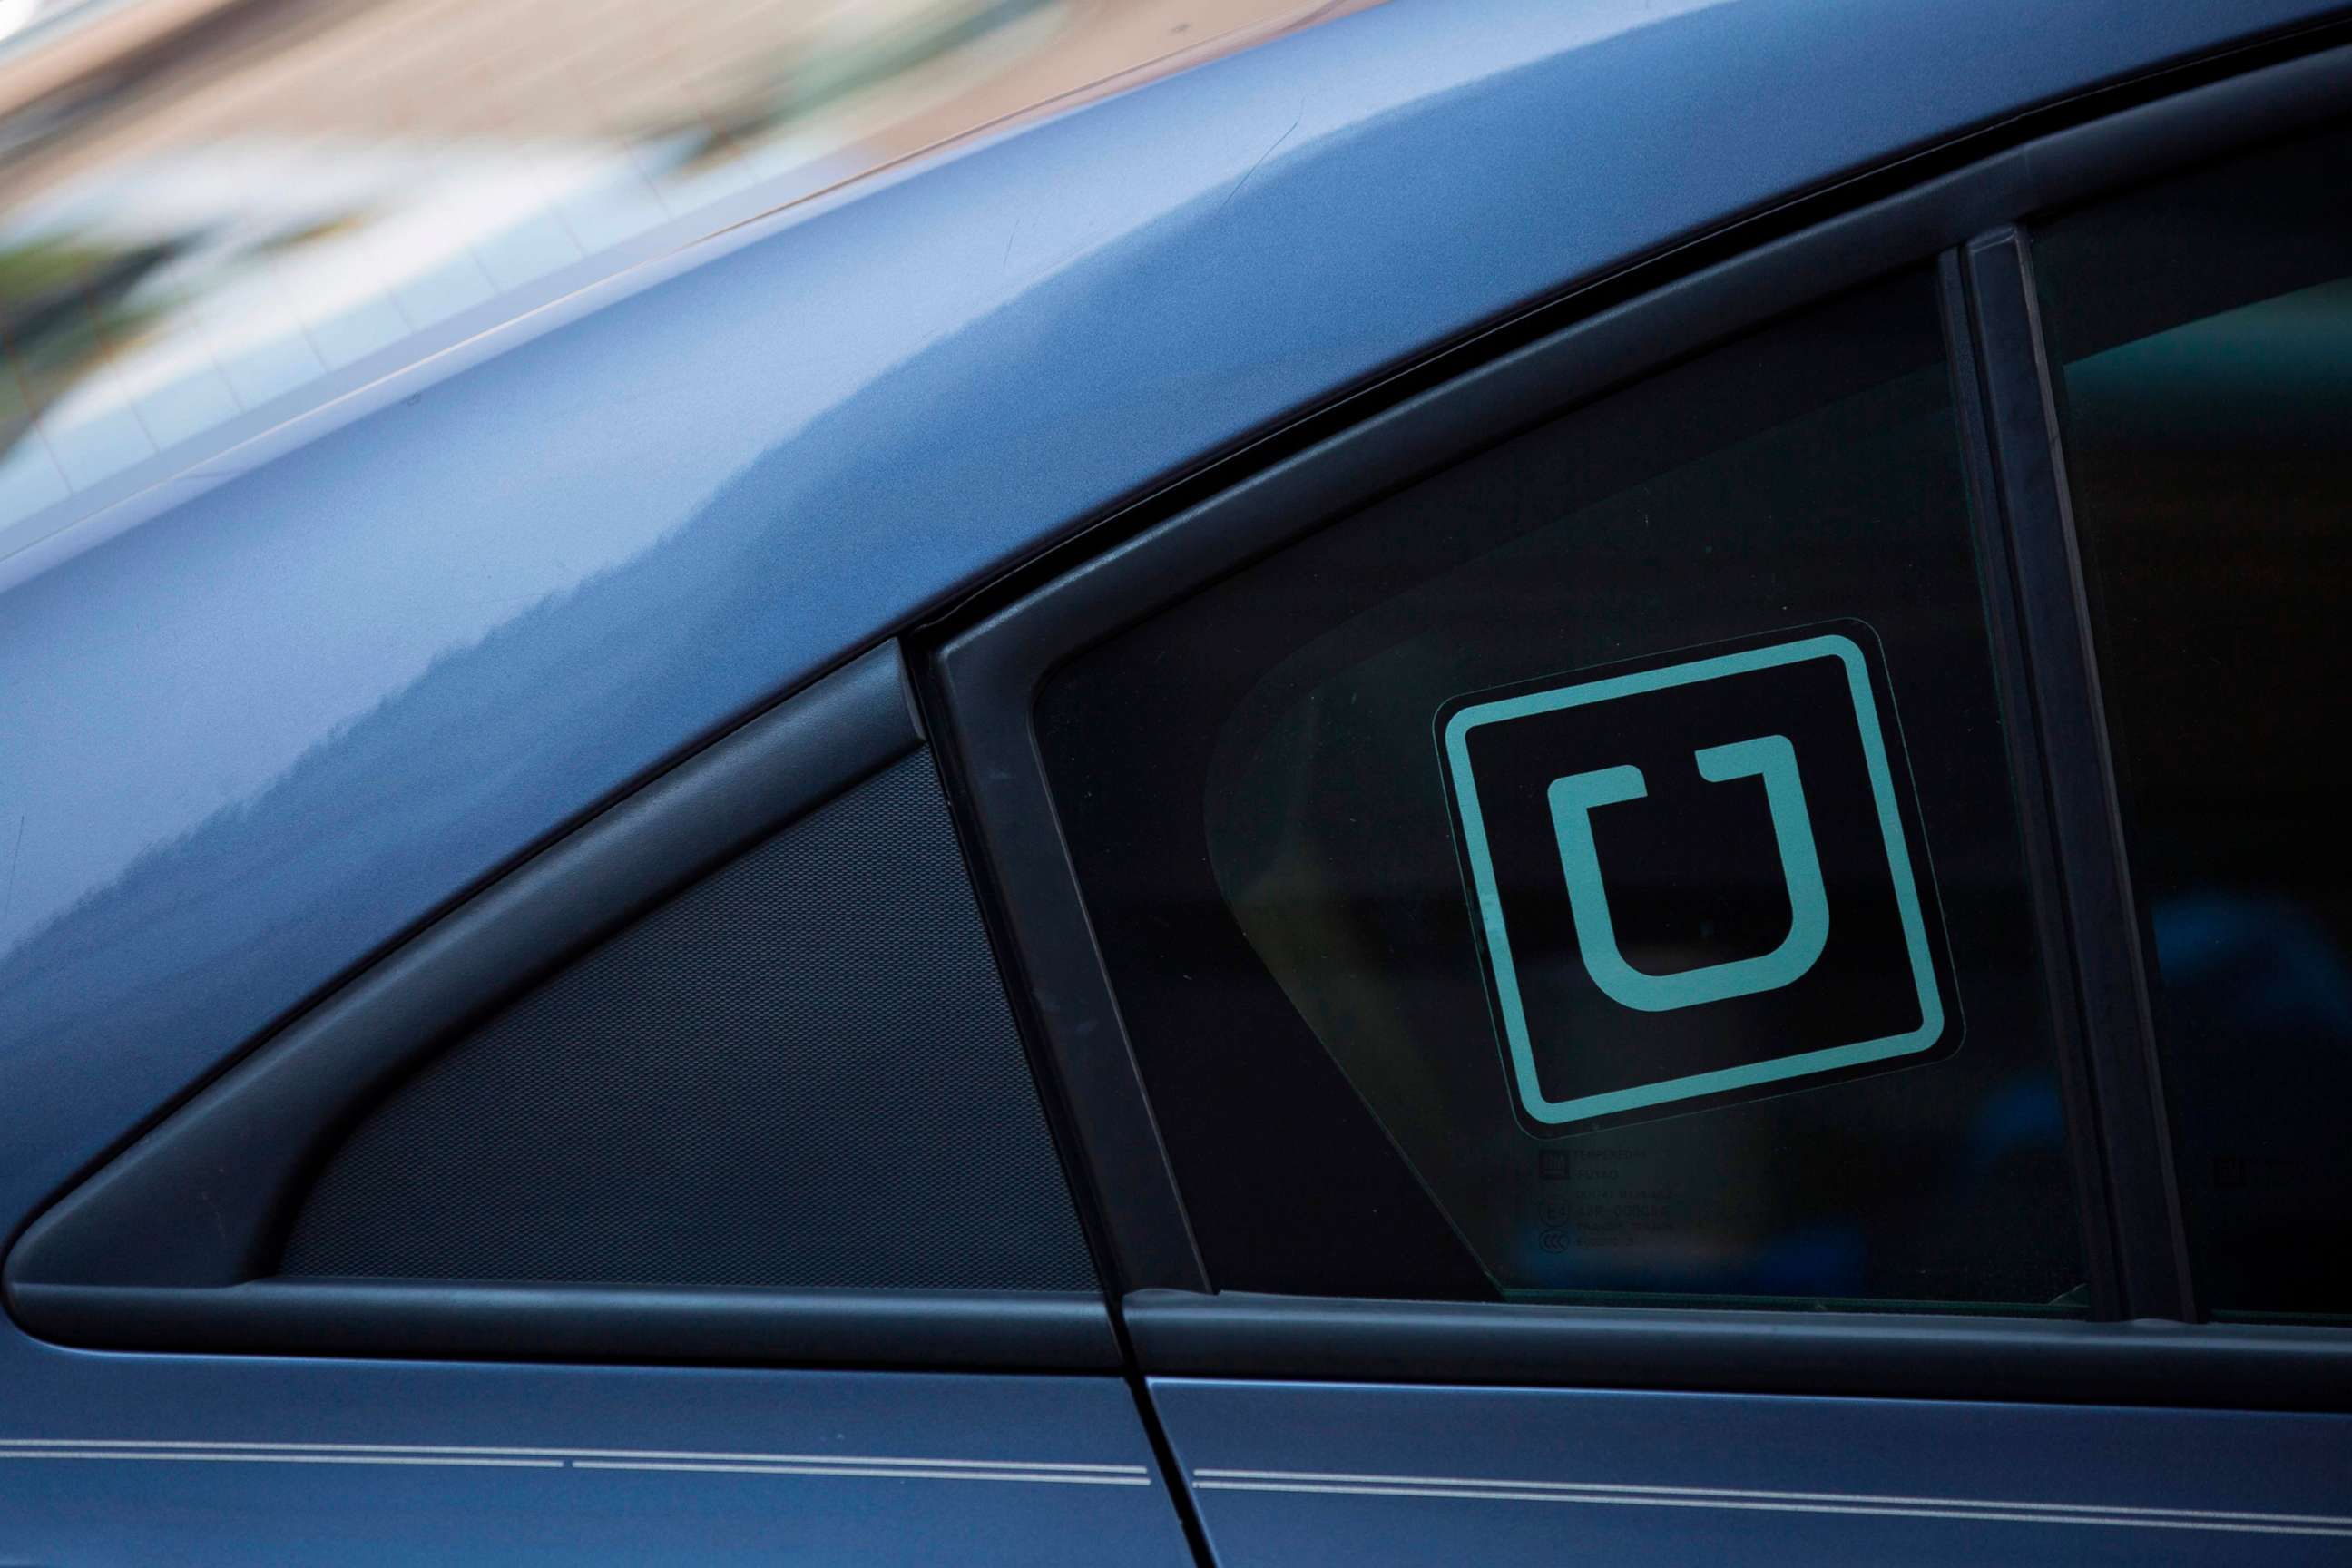 PHOTO: In this file photo taken on July 09, 2019, the Uber logo is seen on a car in Washington, D.C.